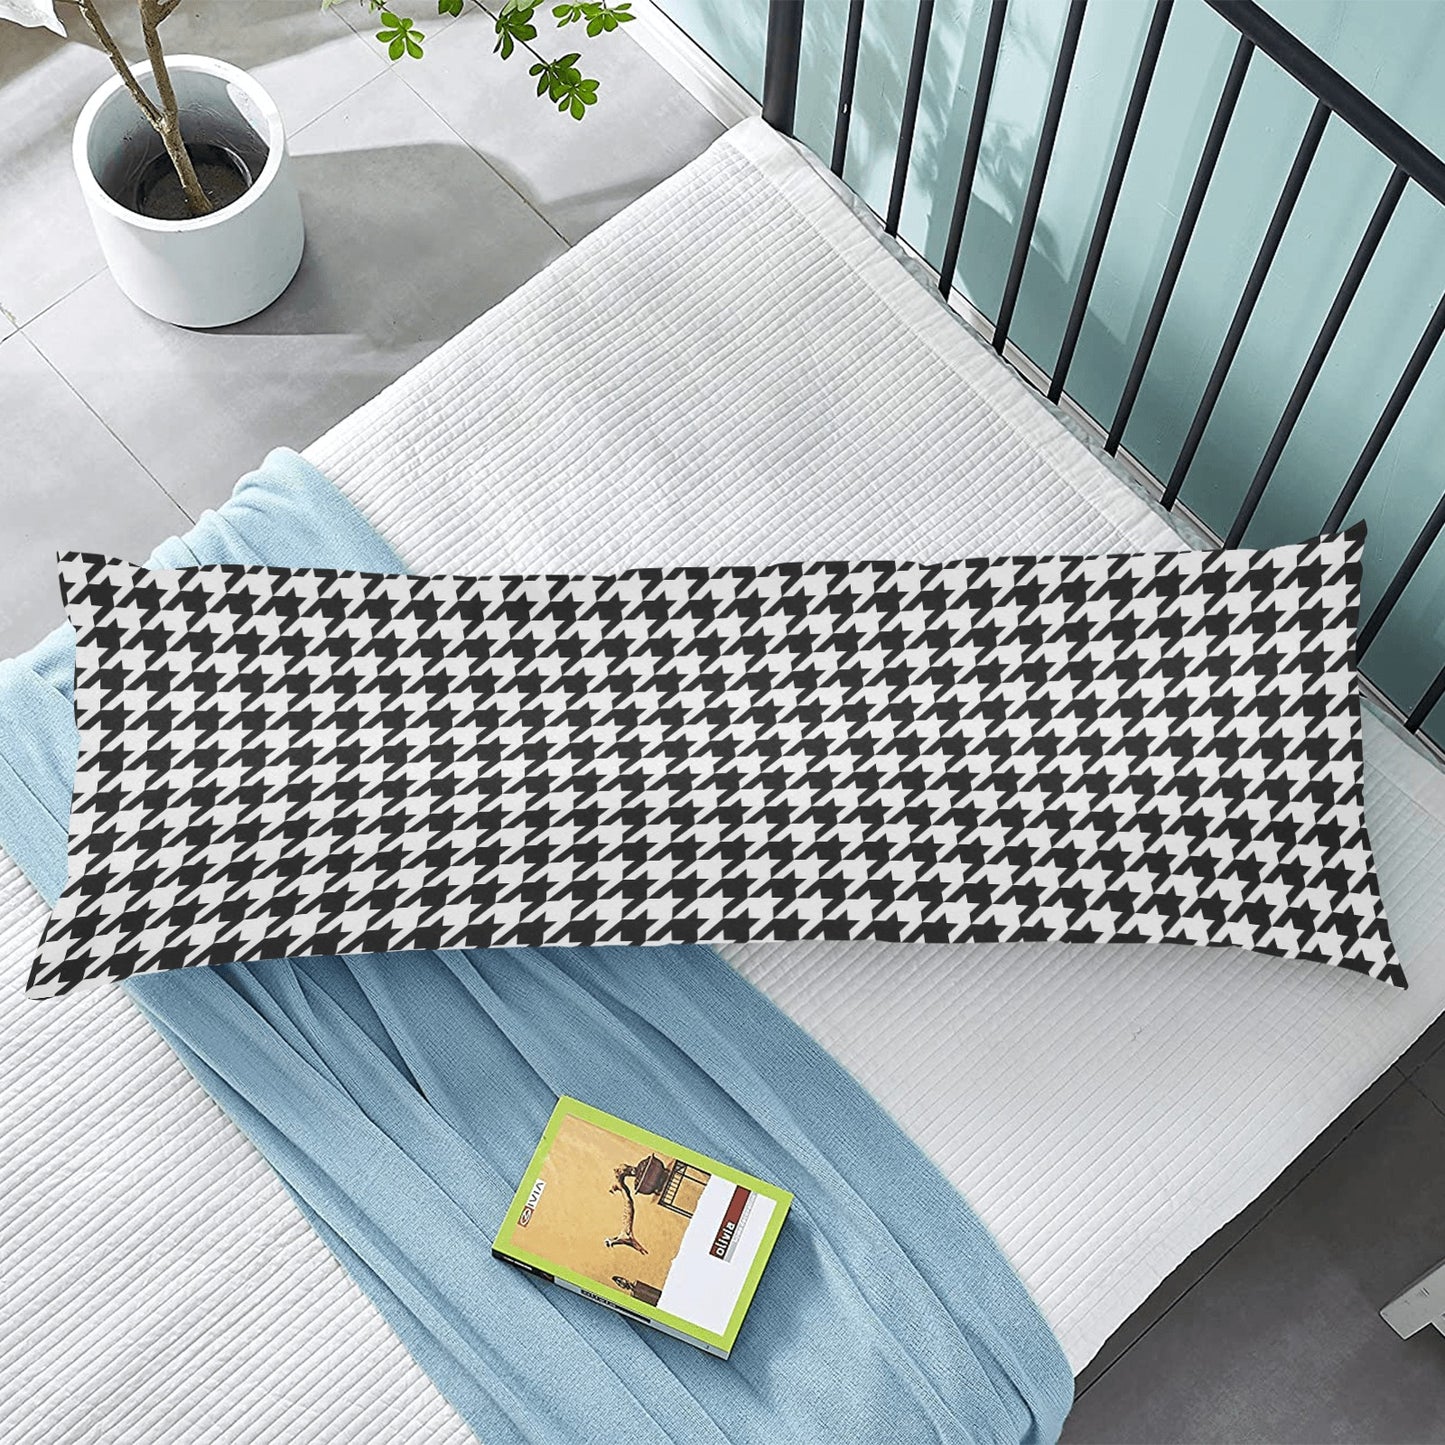 Black White Houndstooth Body Pillow Case, Pattern Long Large Bed Accent Pillowcase Print Throw Decor Decorative Cover